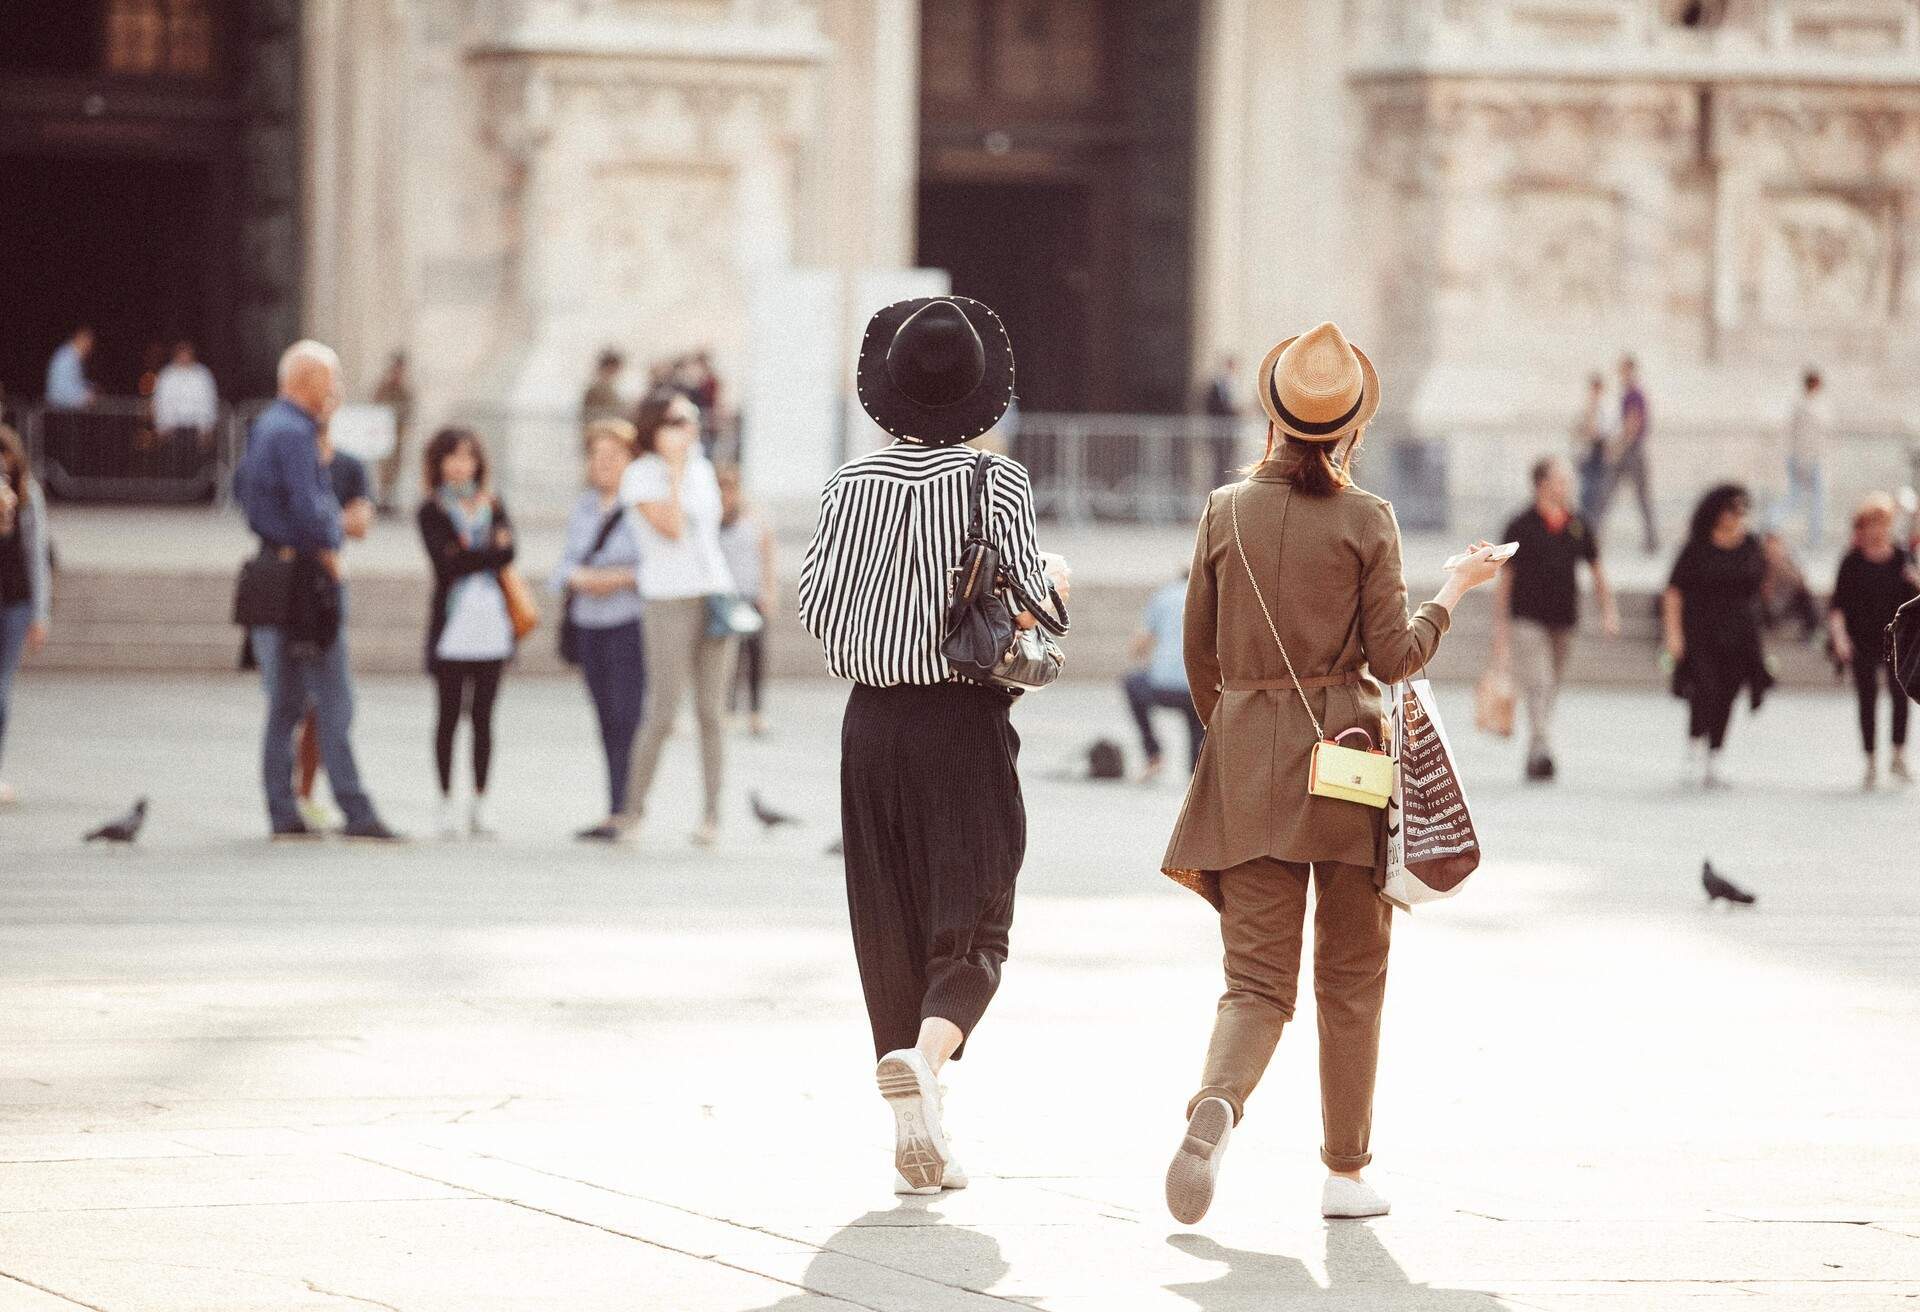 Two stylish women strolling across a town square, admiring the wonderful architecture.